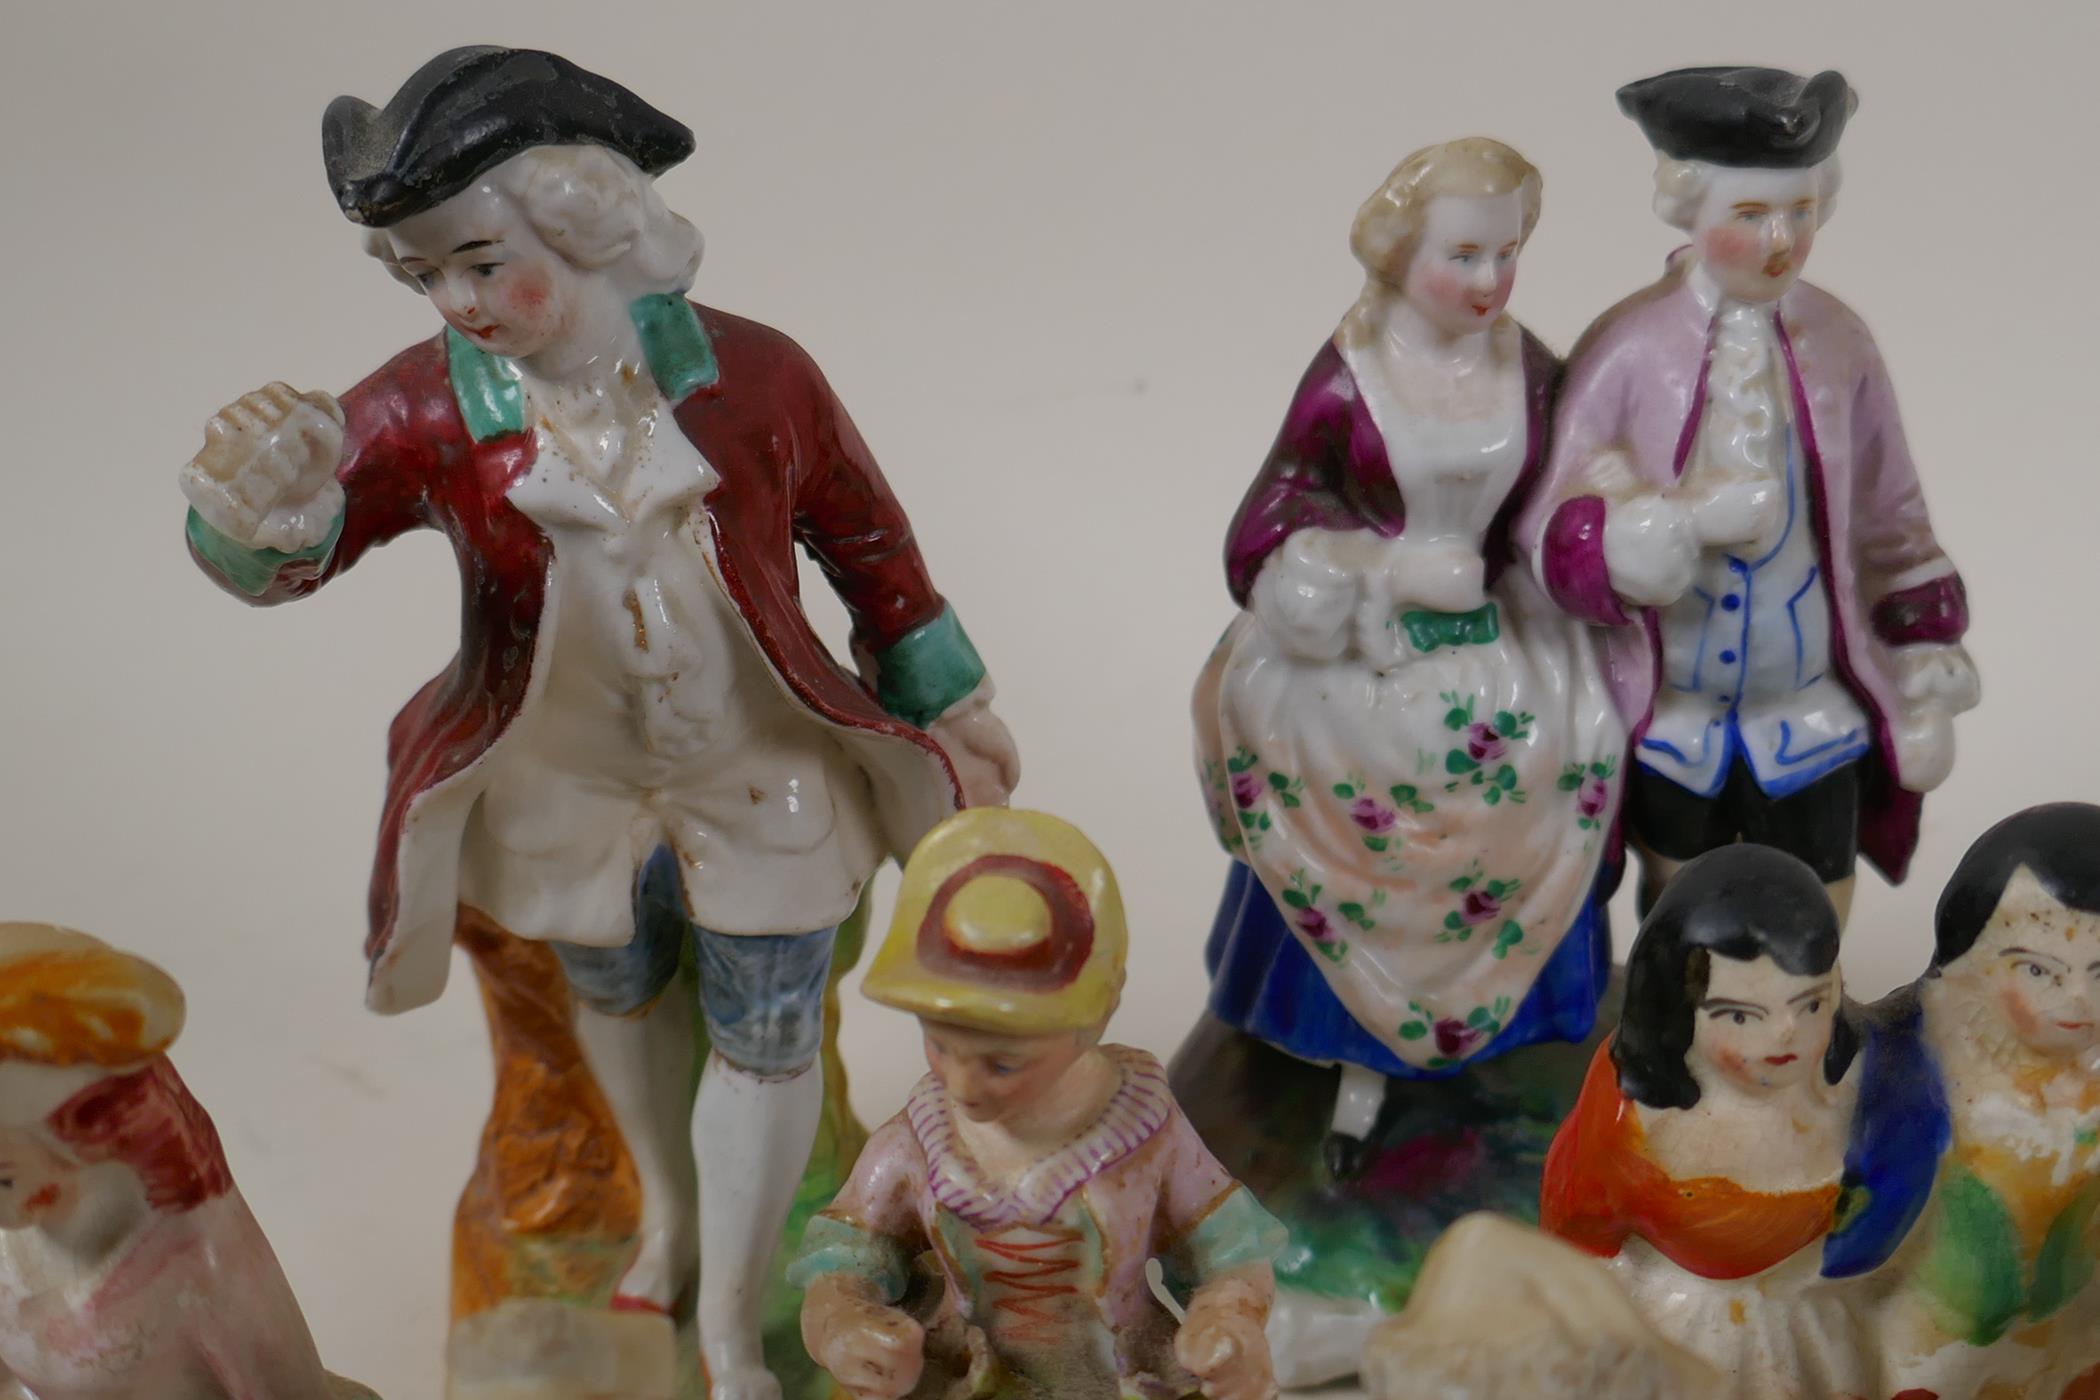 Eleven C19th continental porcelain figurines including groups and a fairing, largest 5½" - Image 4 of 6